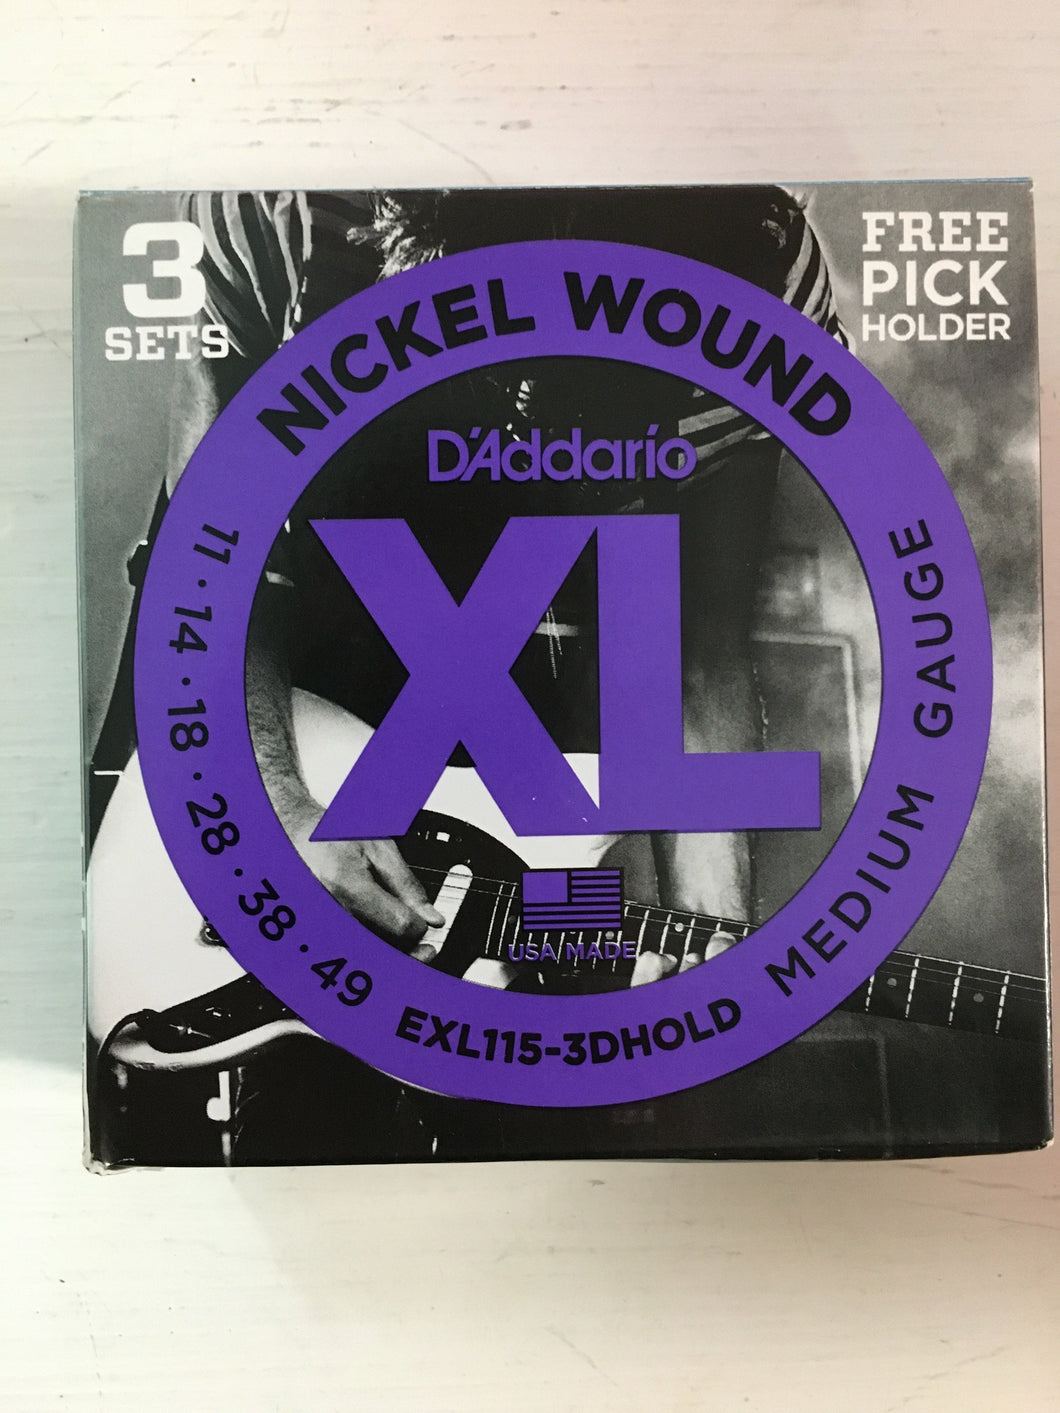 Electric Strings - D'Addario EXL115-3DHOLD Nickel Wound: Set of 3